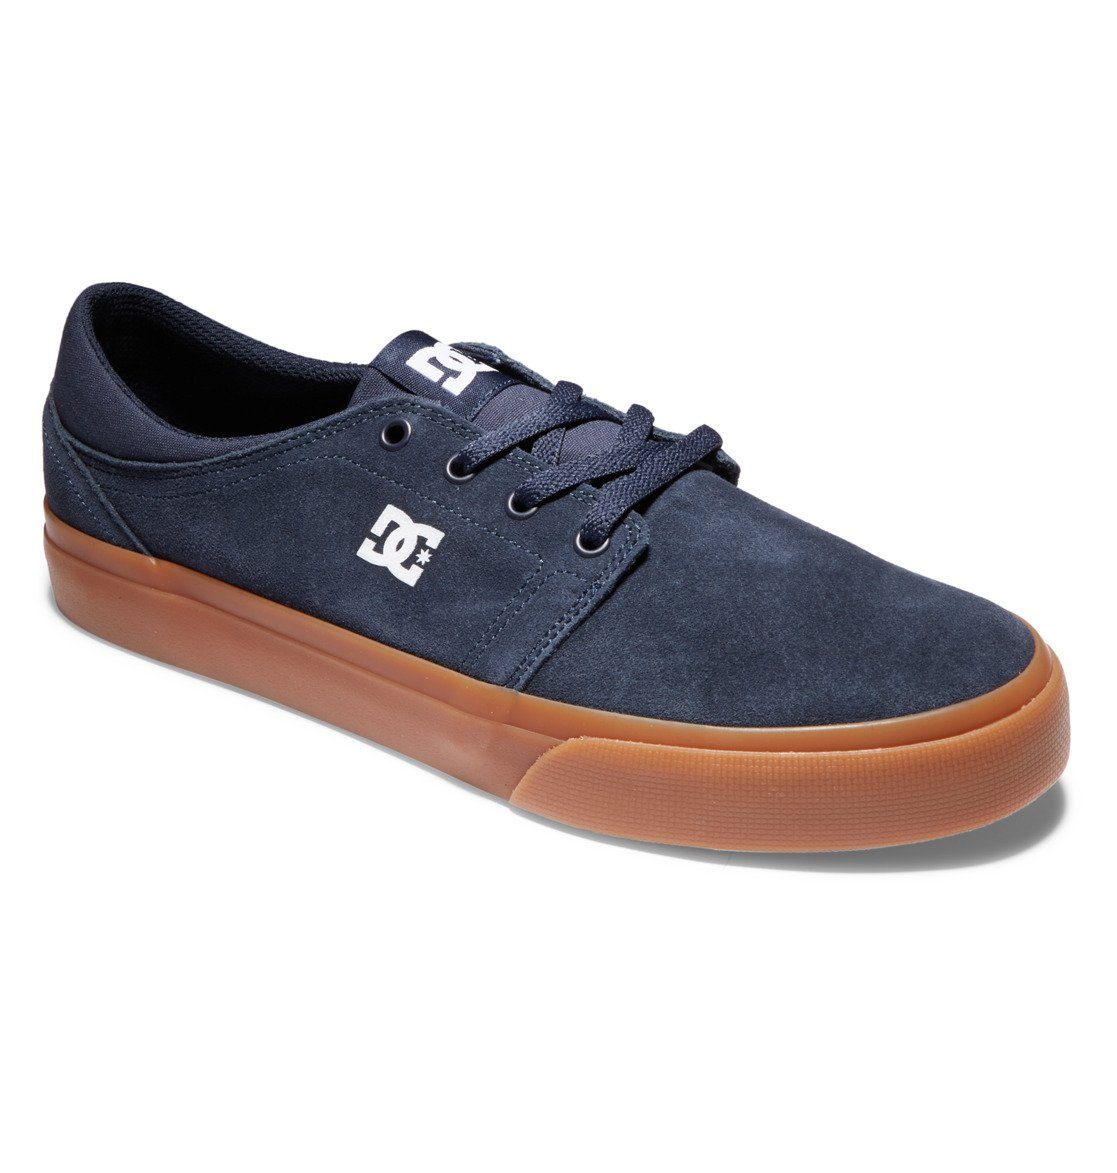 DC Shoes Trase Sd Sneakers Blauw 1 2 Man